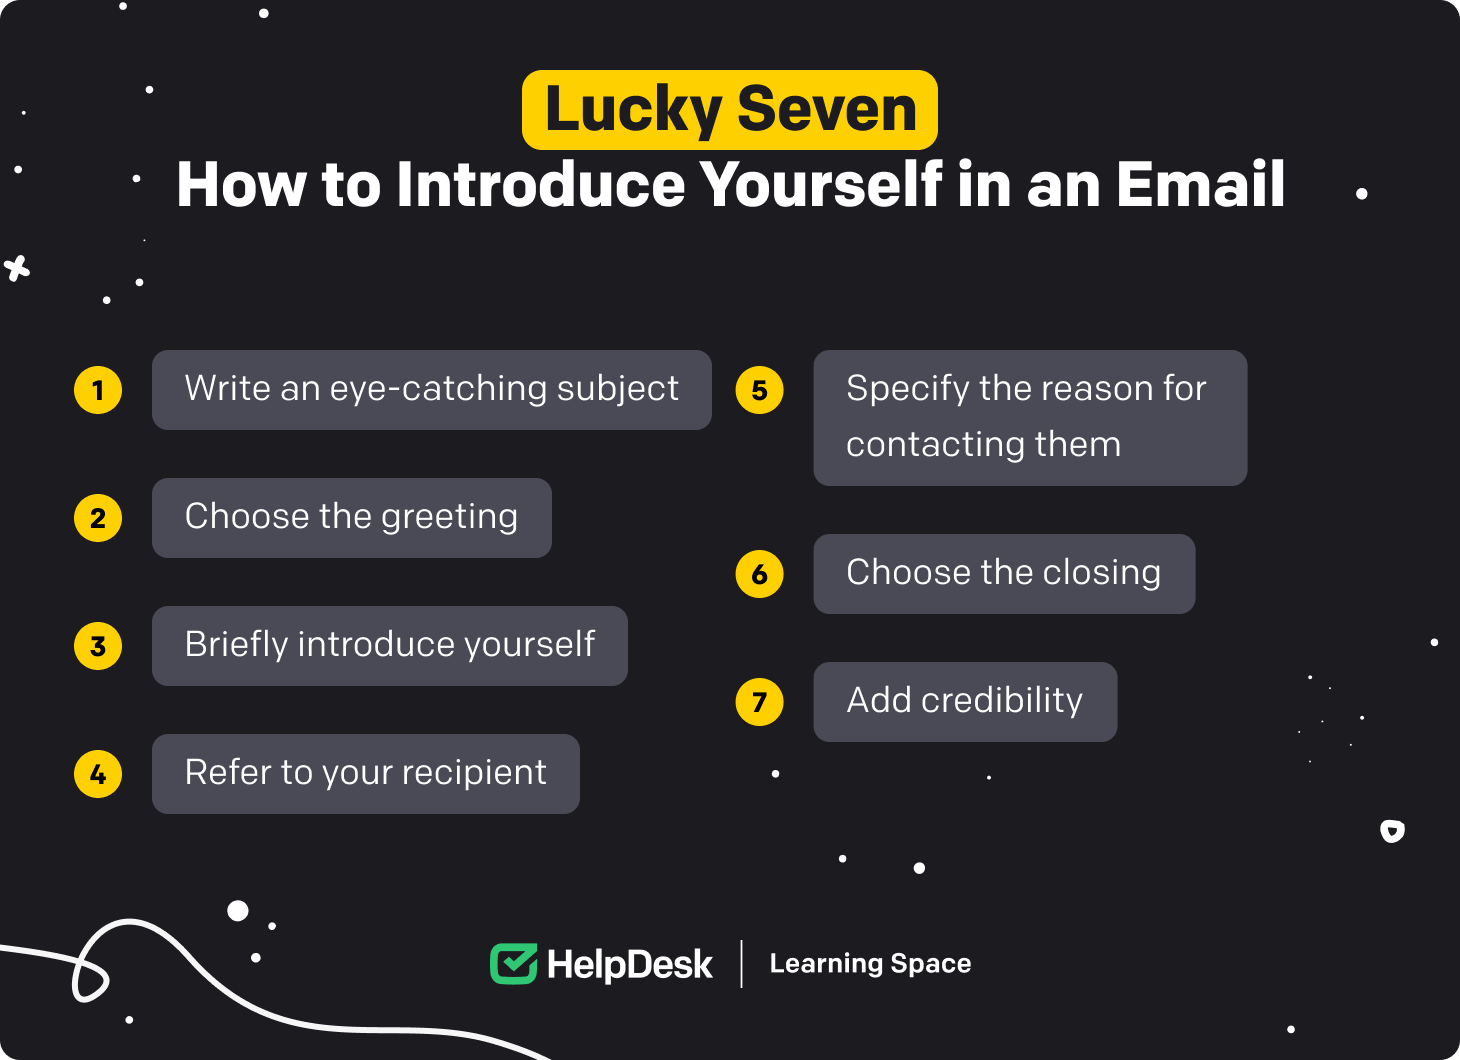 Lucky Seven - How to introduce yourself in an email.